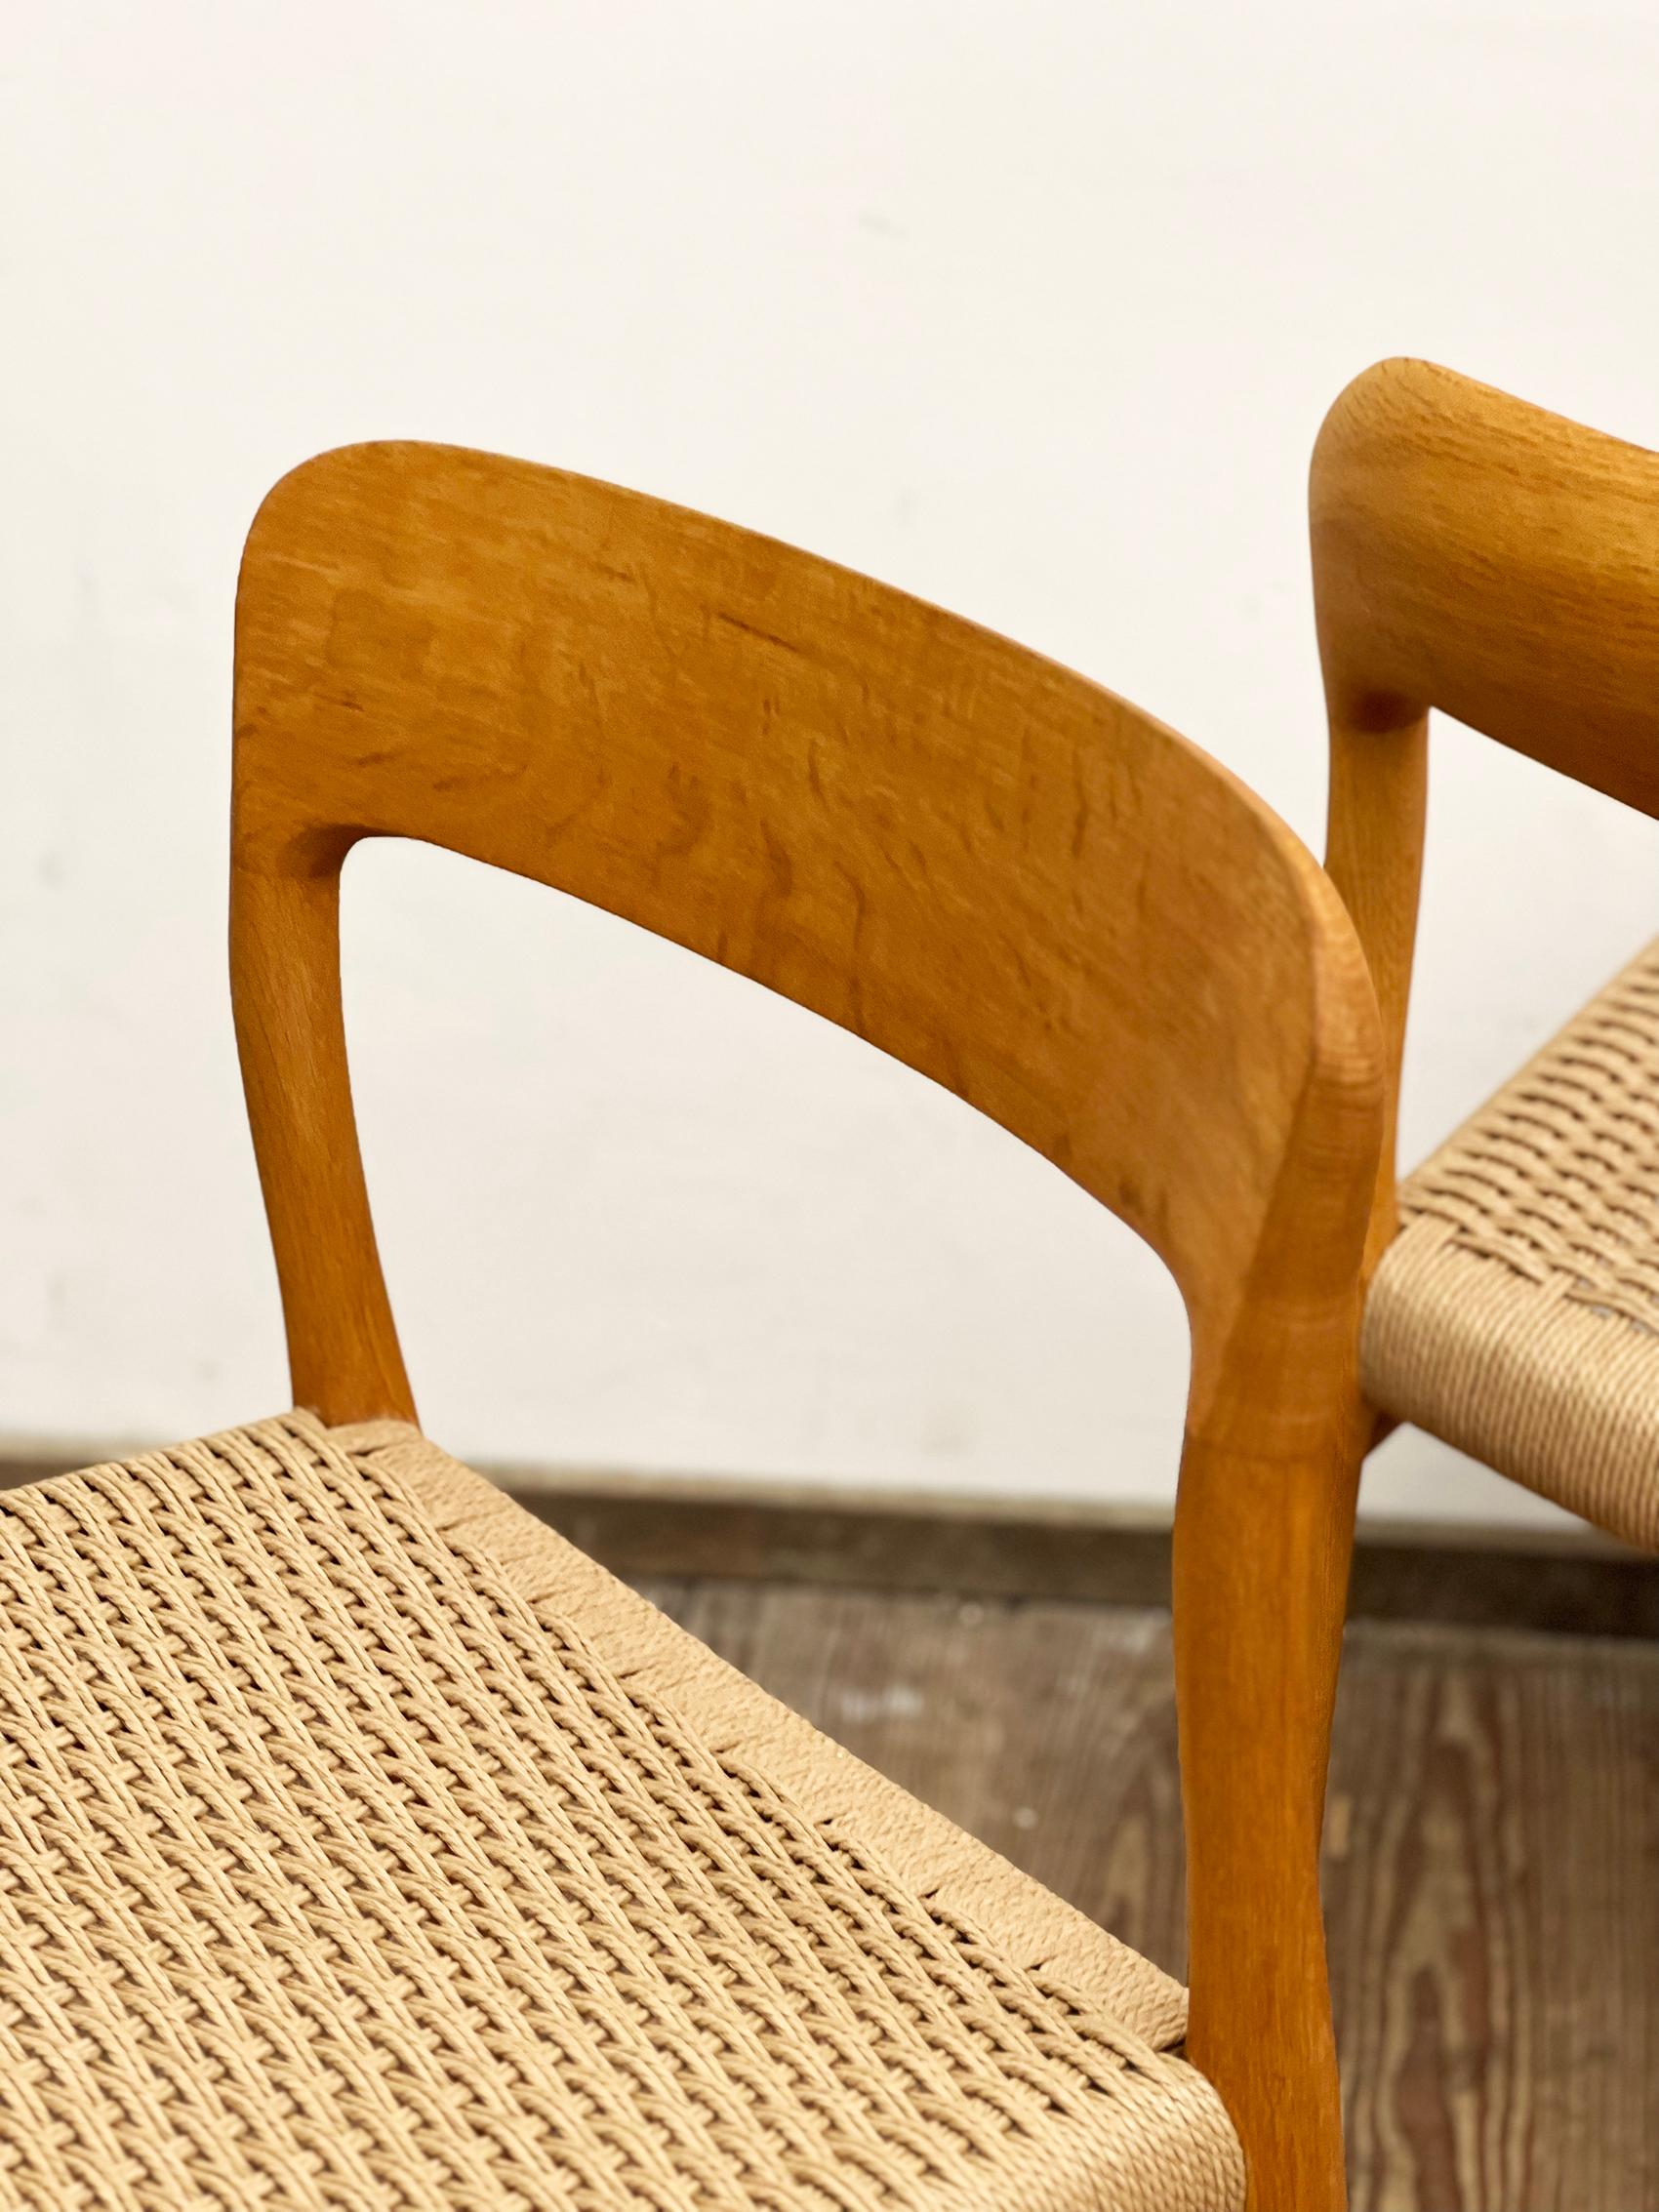 Pair of Mid-Century Oak Dining Chairs #75, Niels O. Møller for J. L. Moller For Sale 4